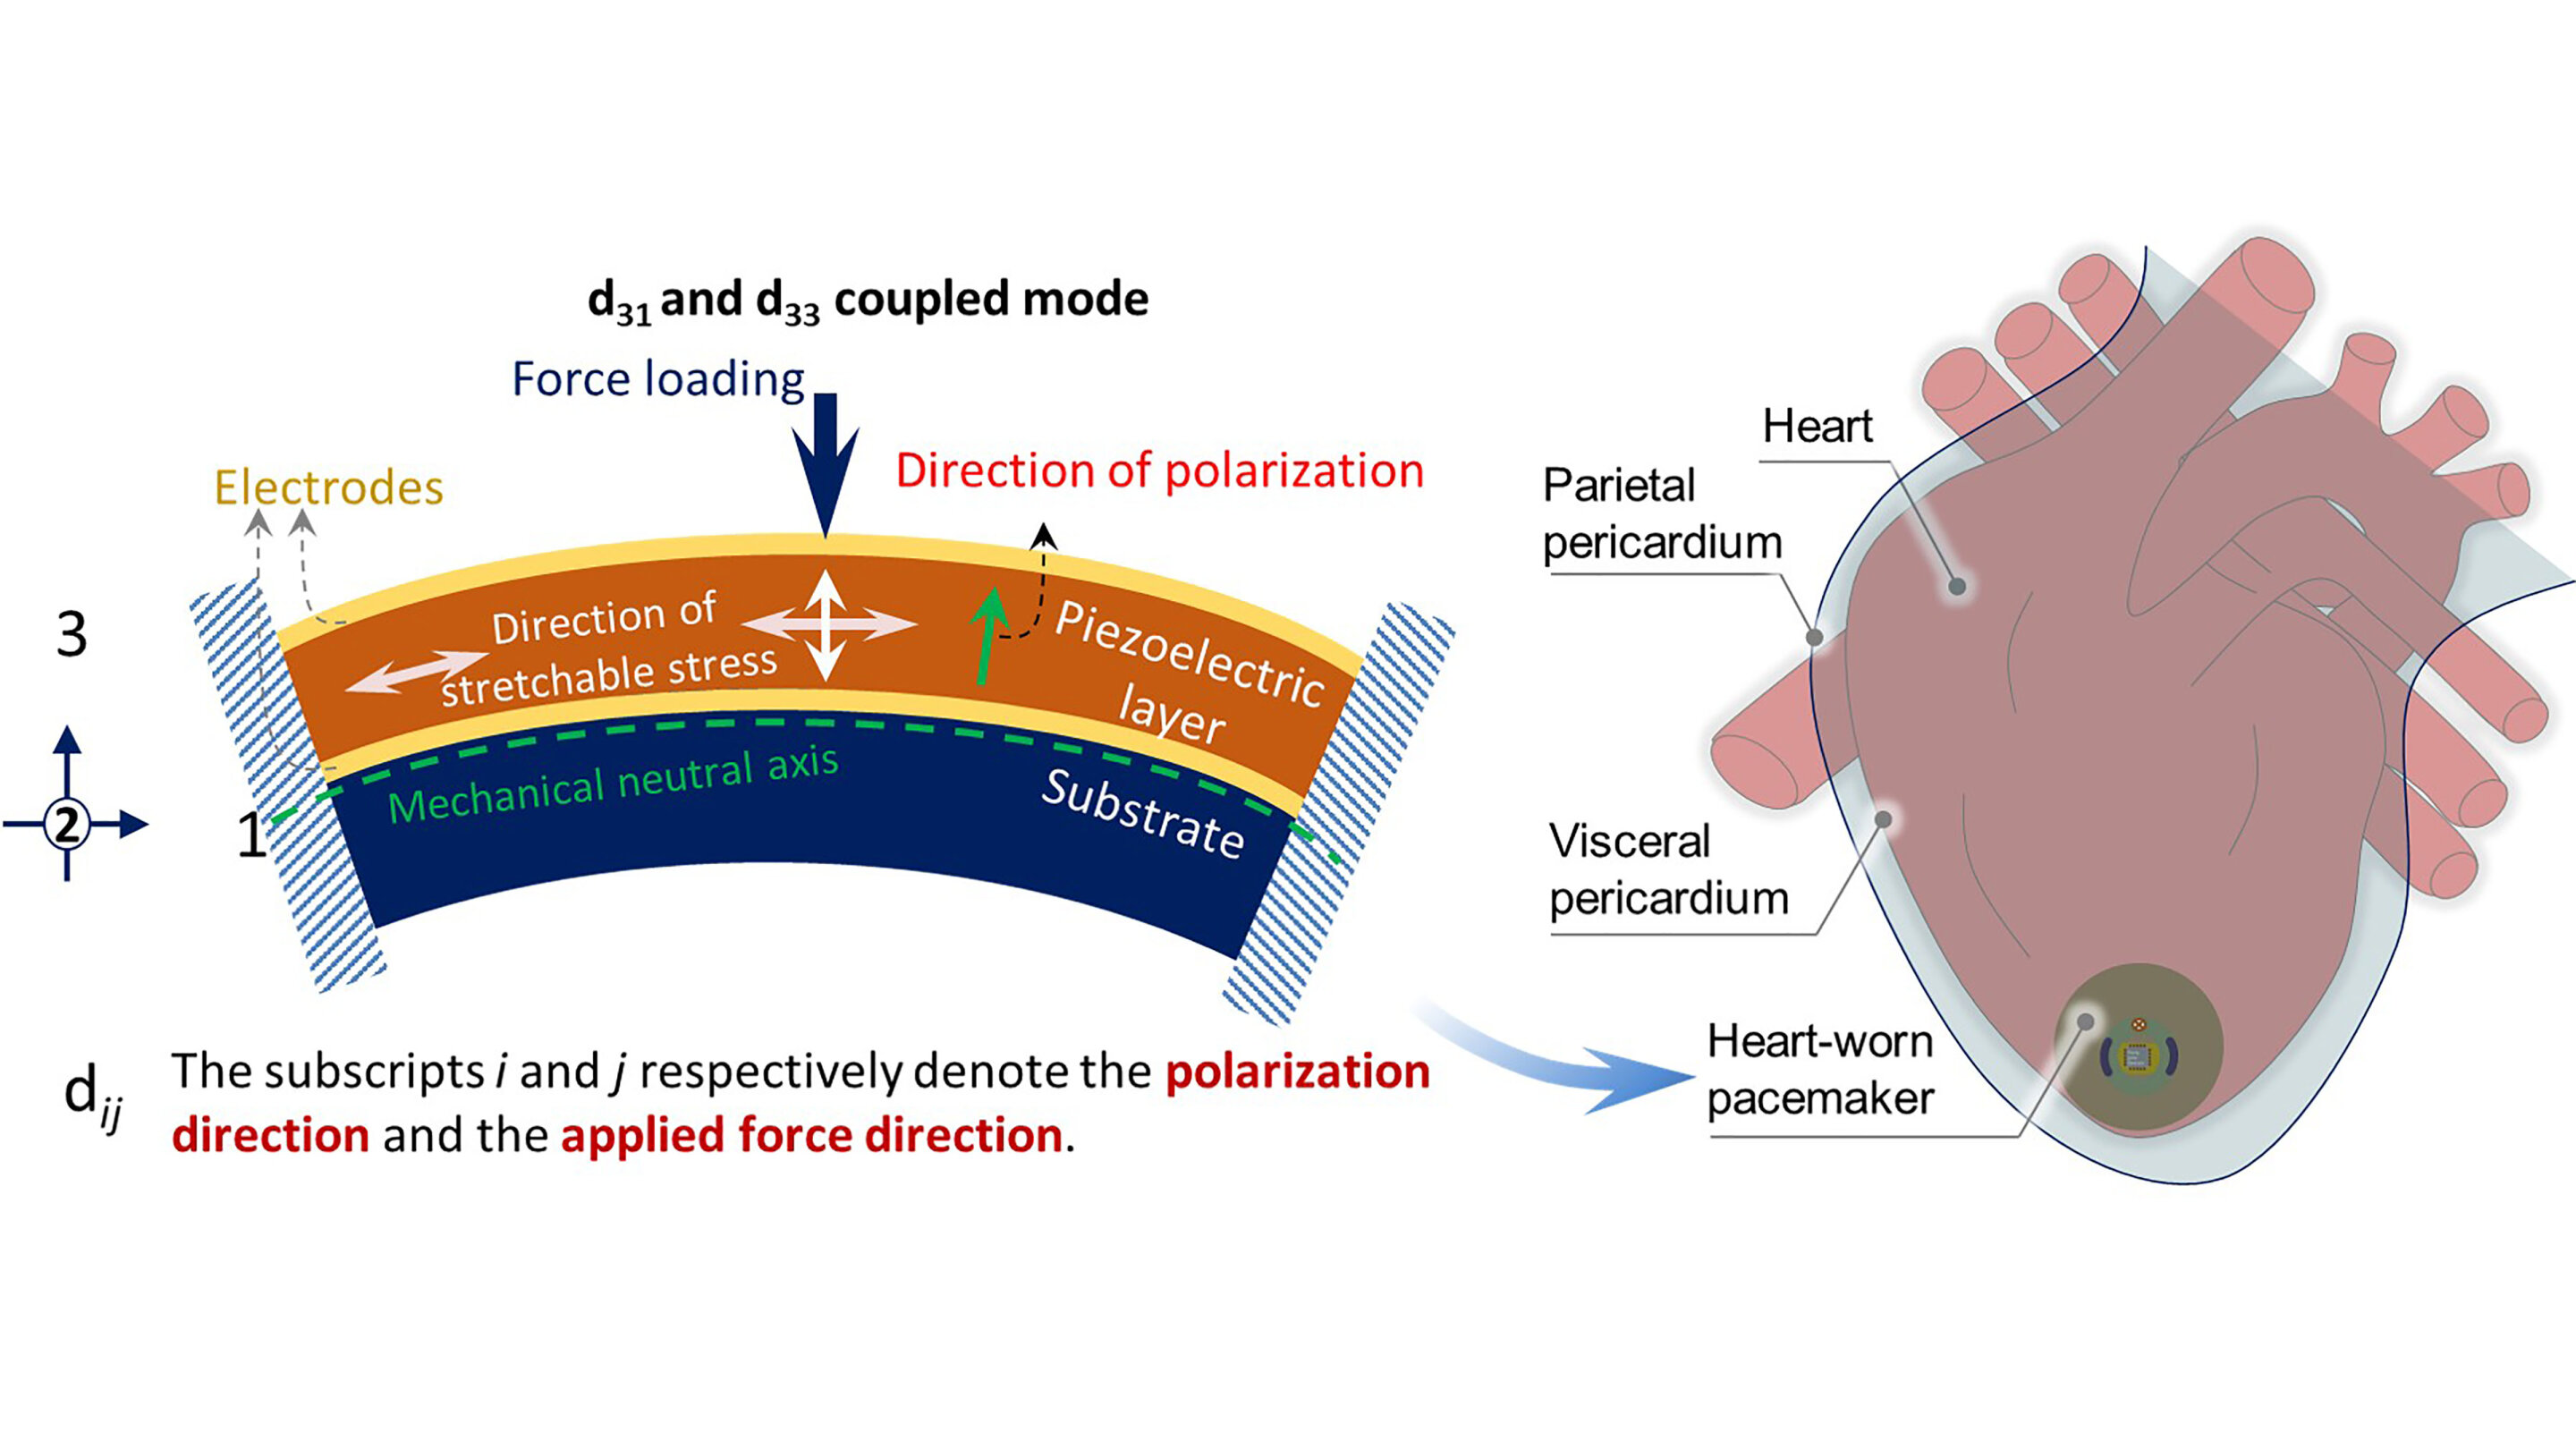 Batteryless pacemaker could use heart's energy for power